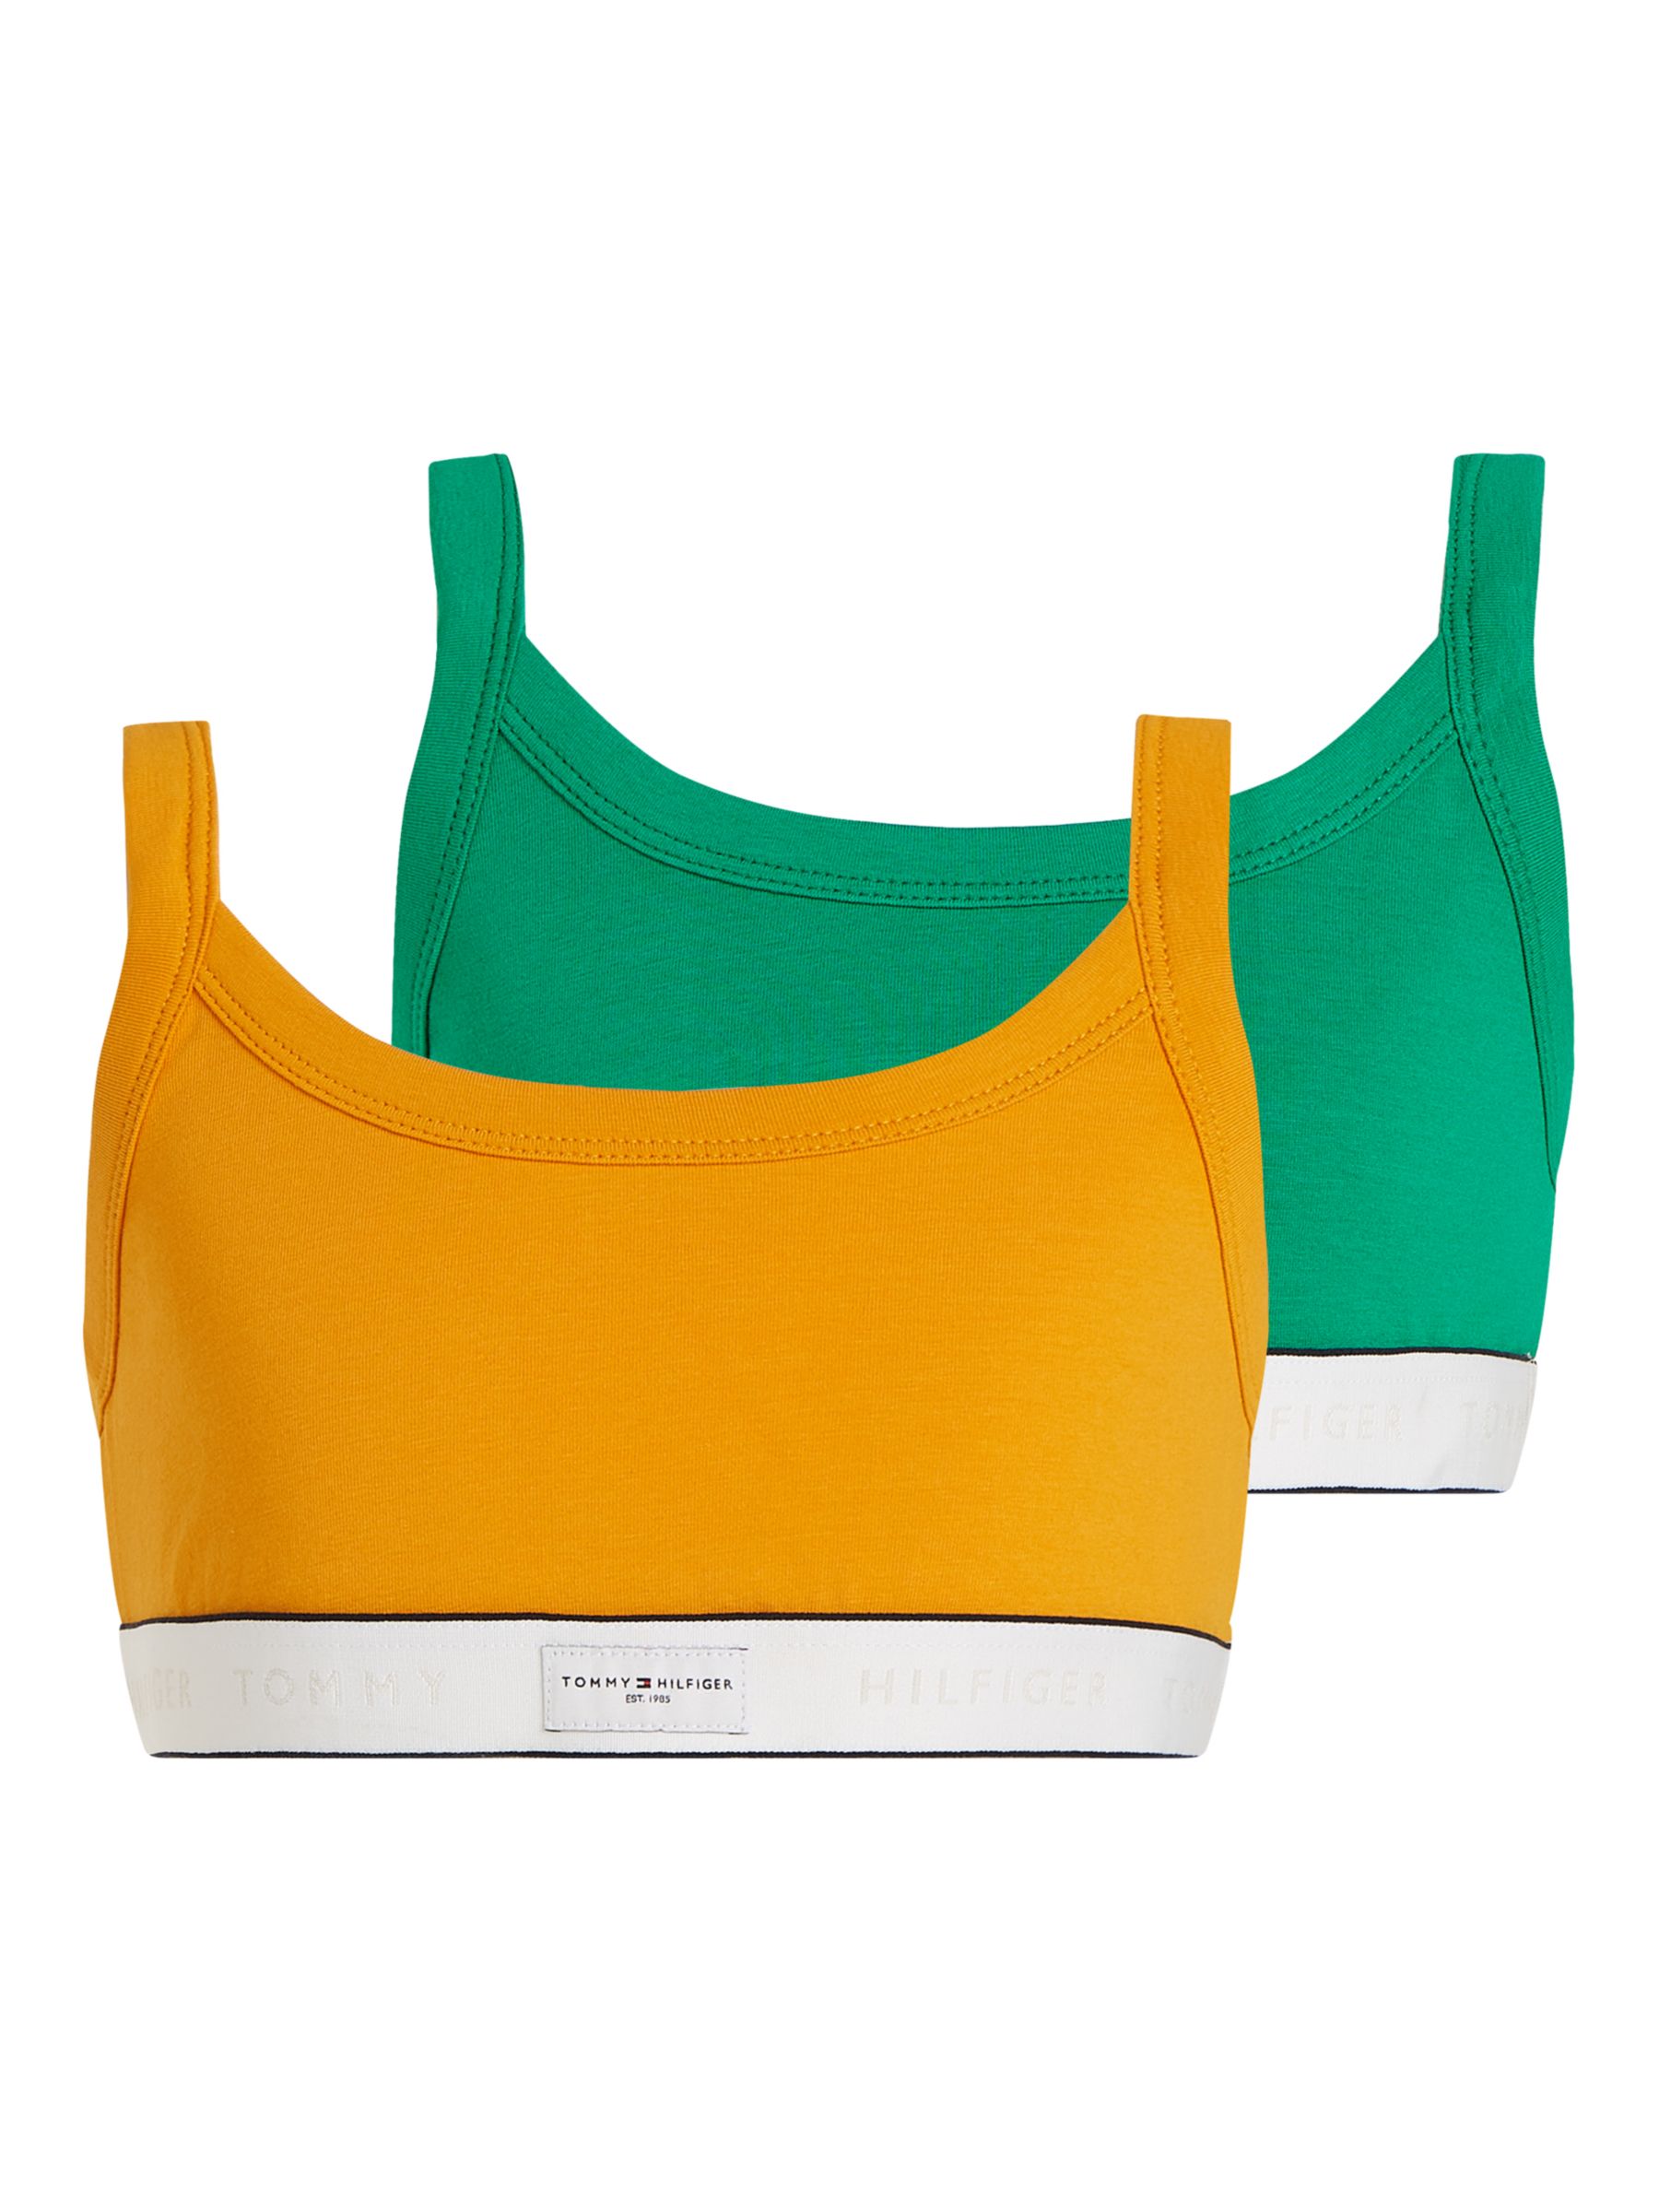 Tommy Hilfiger Kids' Logo Bralettes, Pack Of 2, Olympic Green/Rich Ochre, 14-16 years